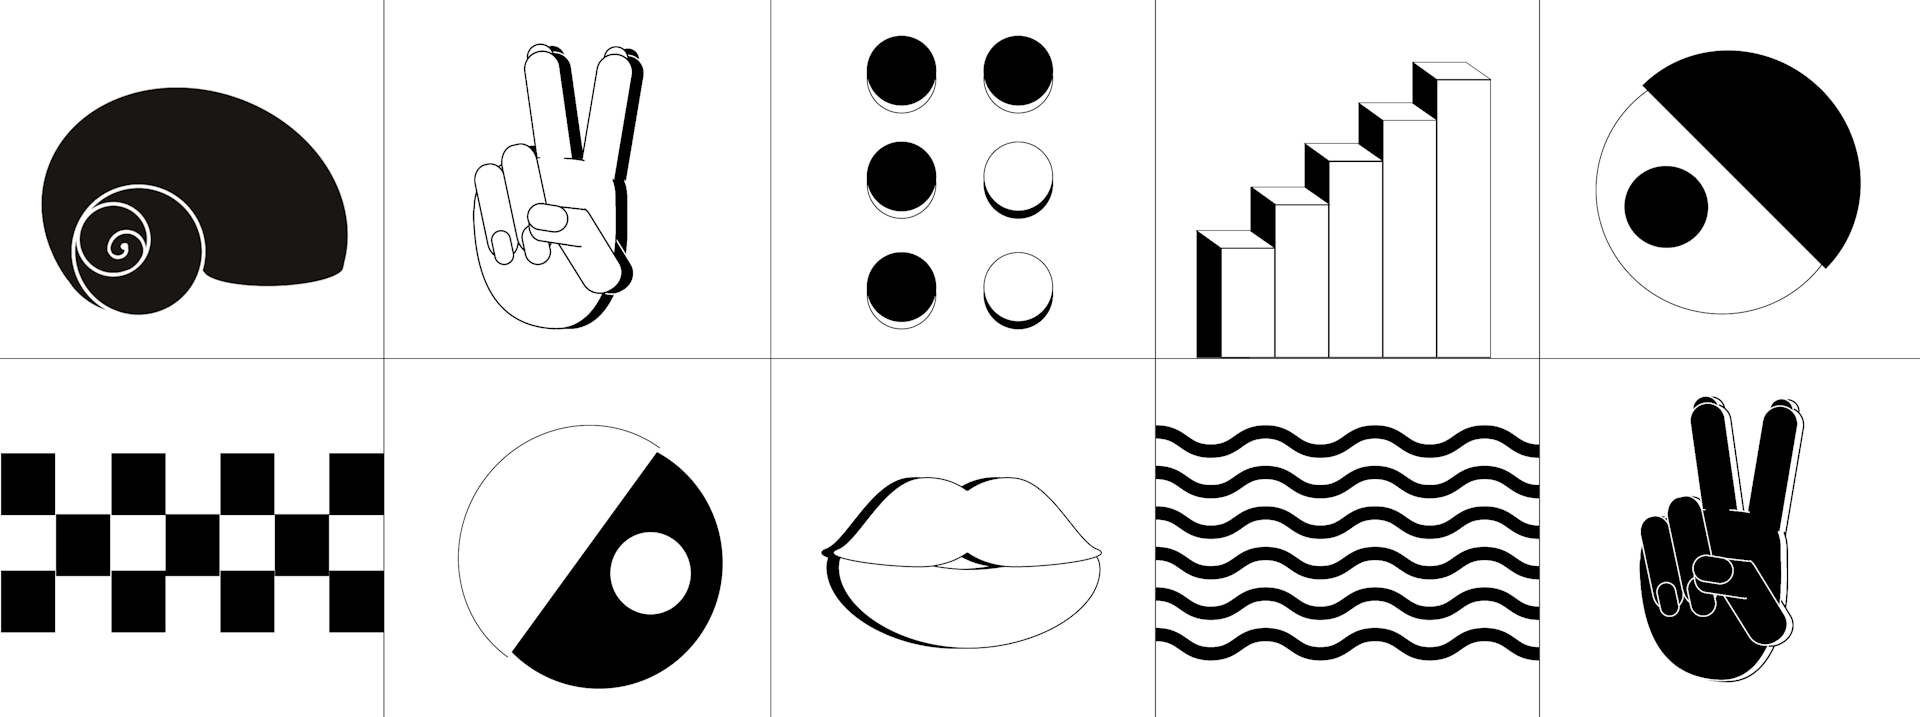 A series of black and white symbols ranging from a snail shell through to the peace sign.